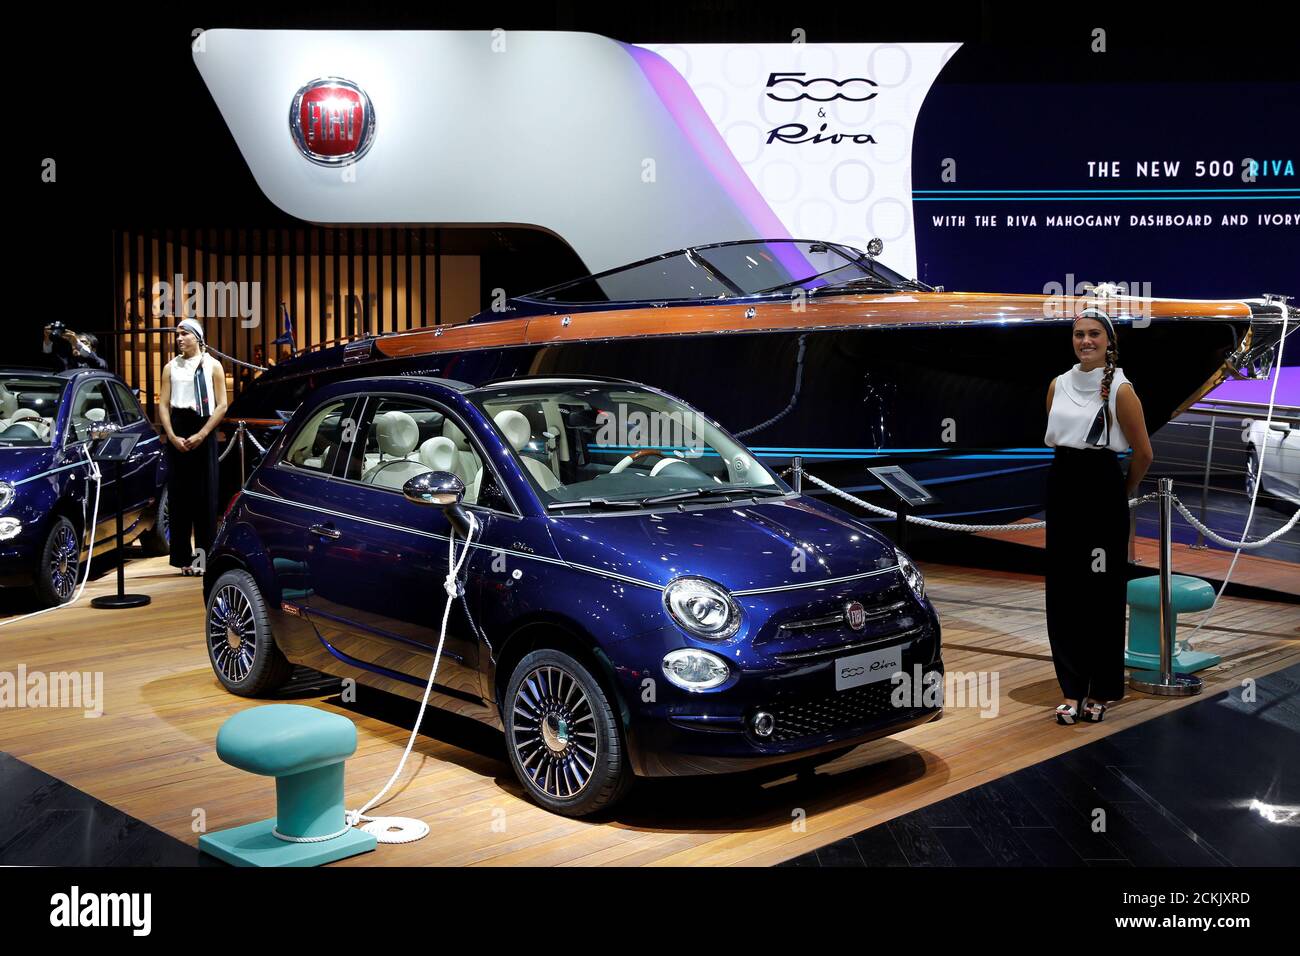 A Fiat 500 Riva Is Displayed On Media Day At The Paris Auto Show In Paris France September 29 16 Reuters Benoit Tessier Stock Photo Alamy